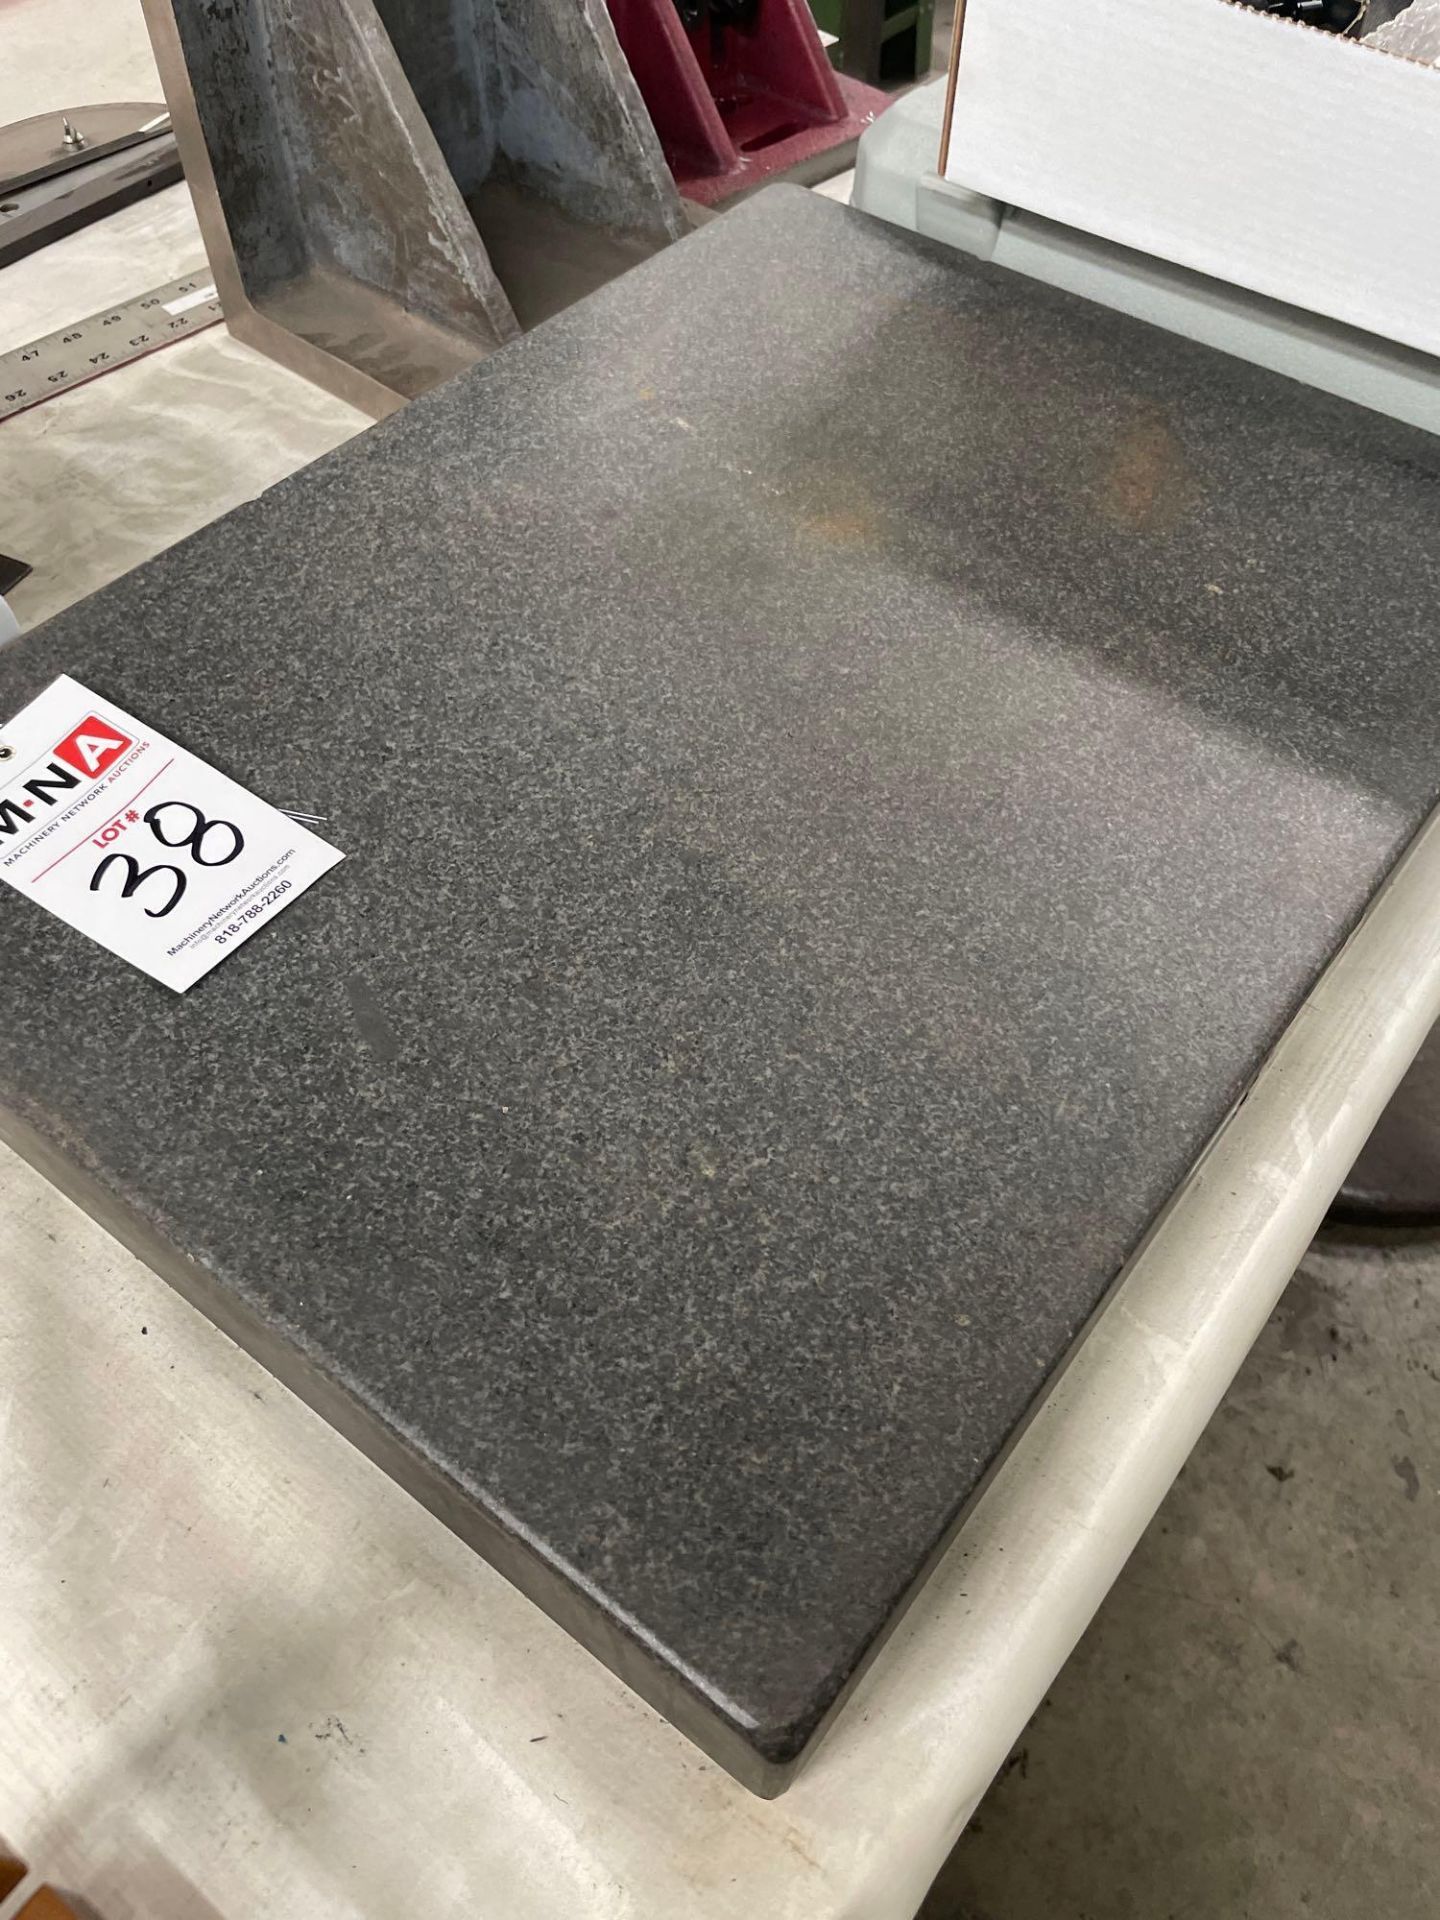 Mojave Granite Surface Plate: 18" x 24" x 2.5" - Image 3 of 4